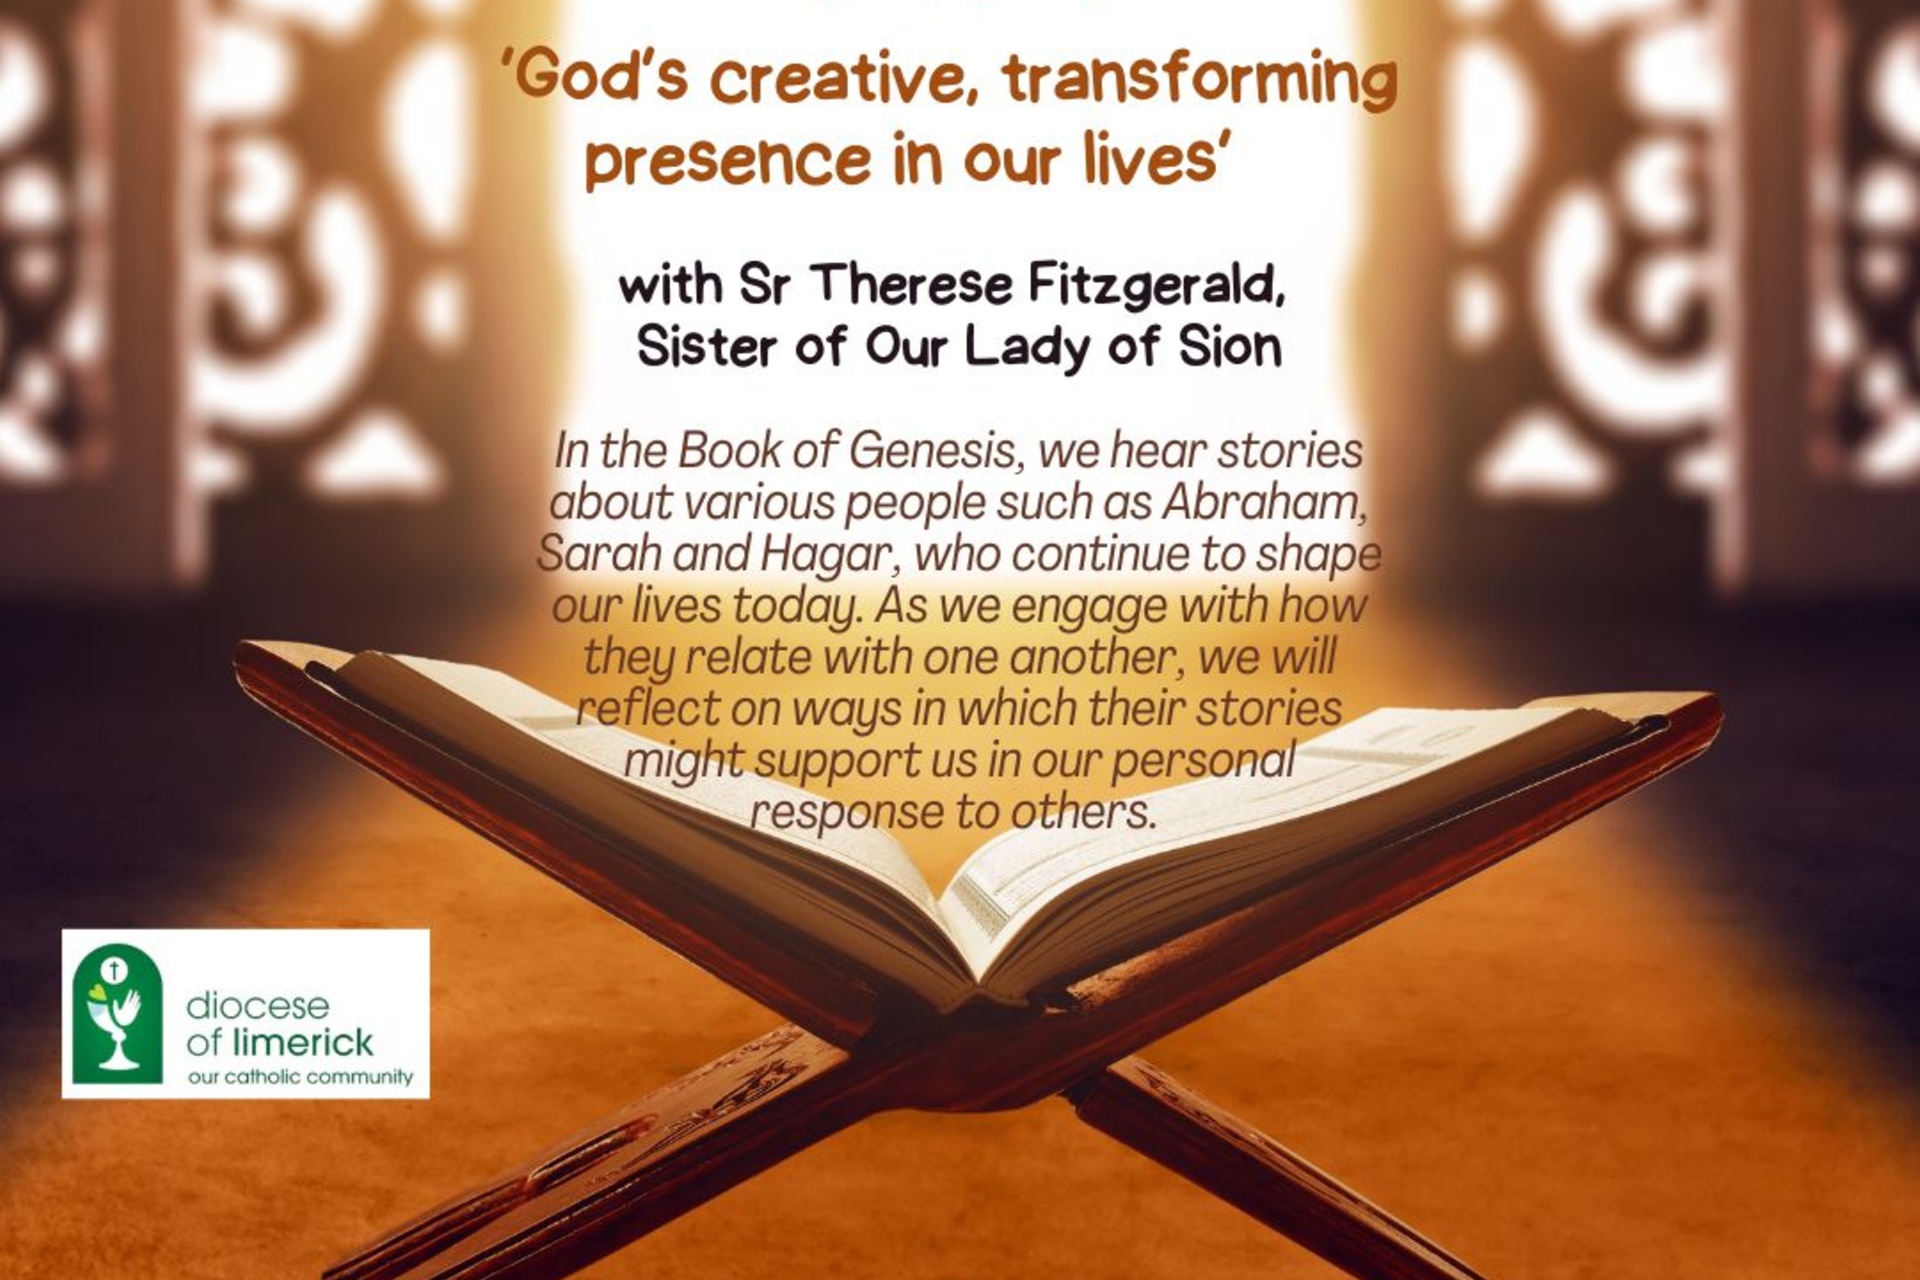 Book of Genesis; 'God's creative, transforming presence in our lives'